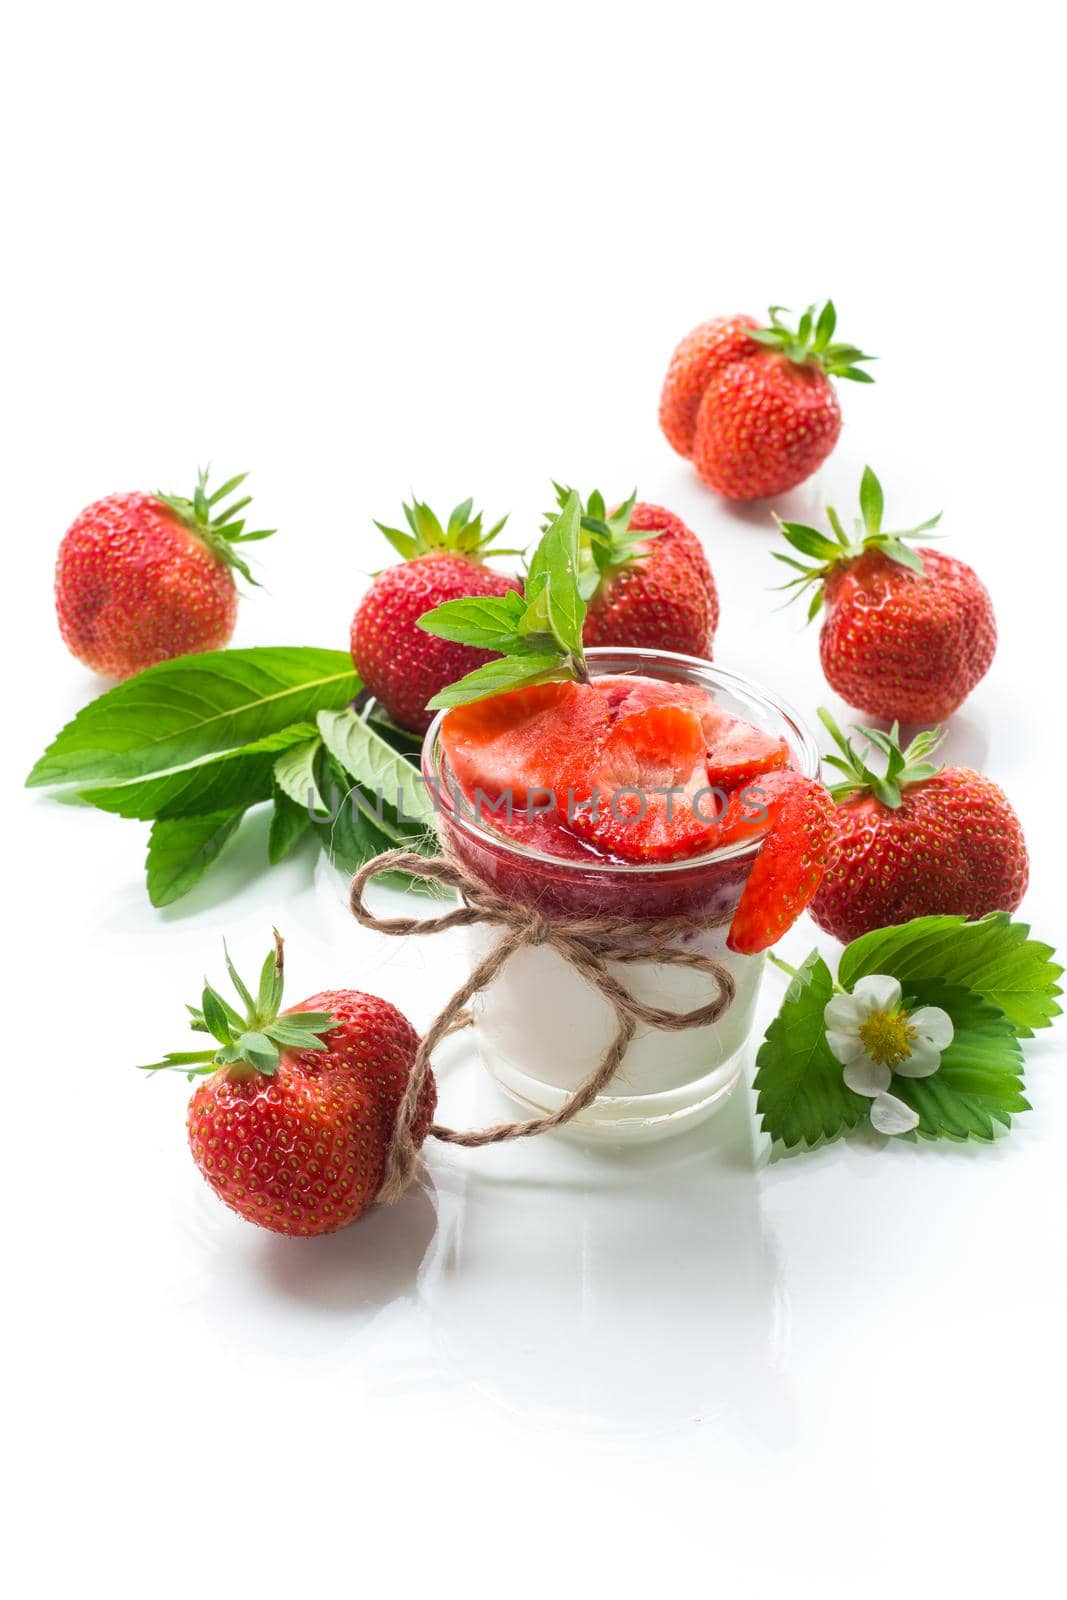 sweet homemade yogurt with strawberry jam and fresh strawberries in a glass, isolated on white background.